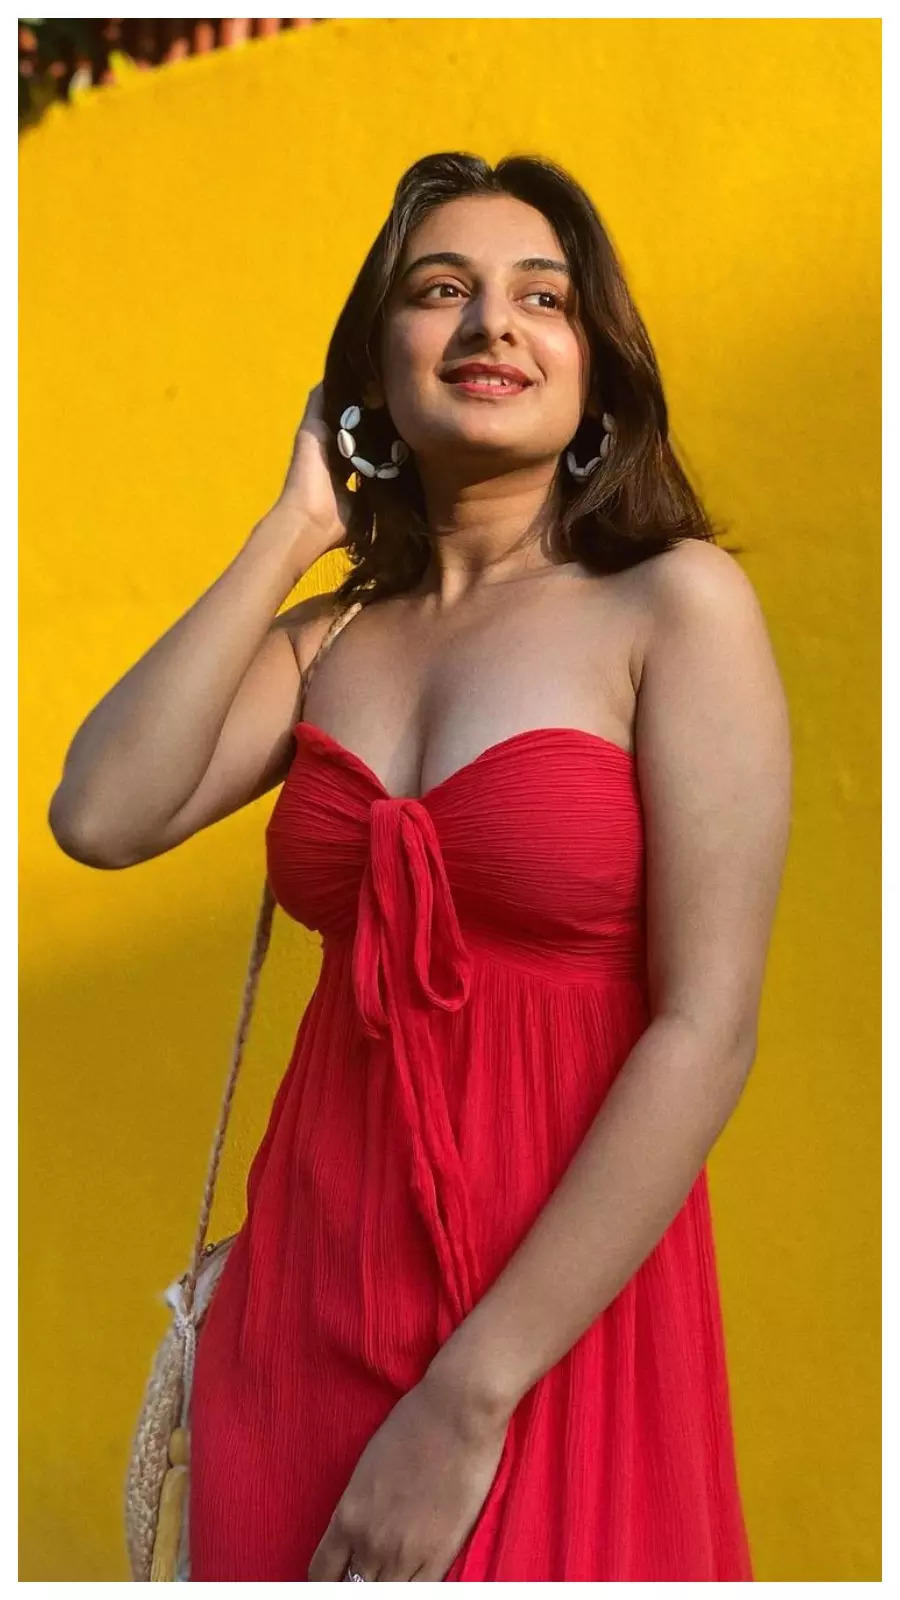 In pics: Esther Anil turns up the heat | Times of India